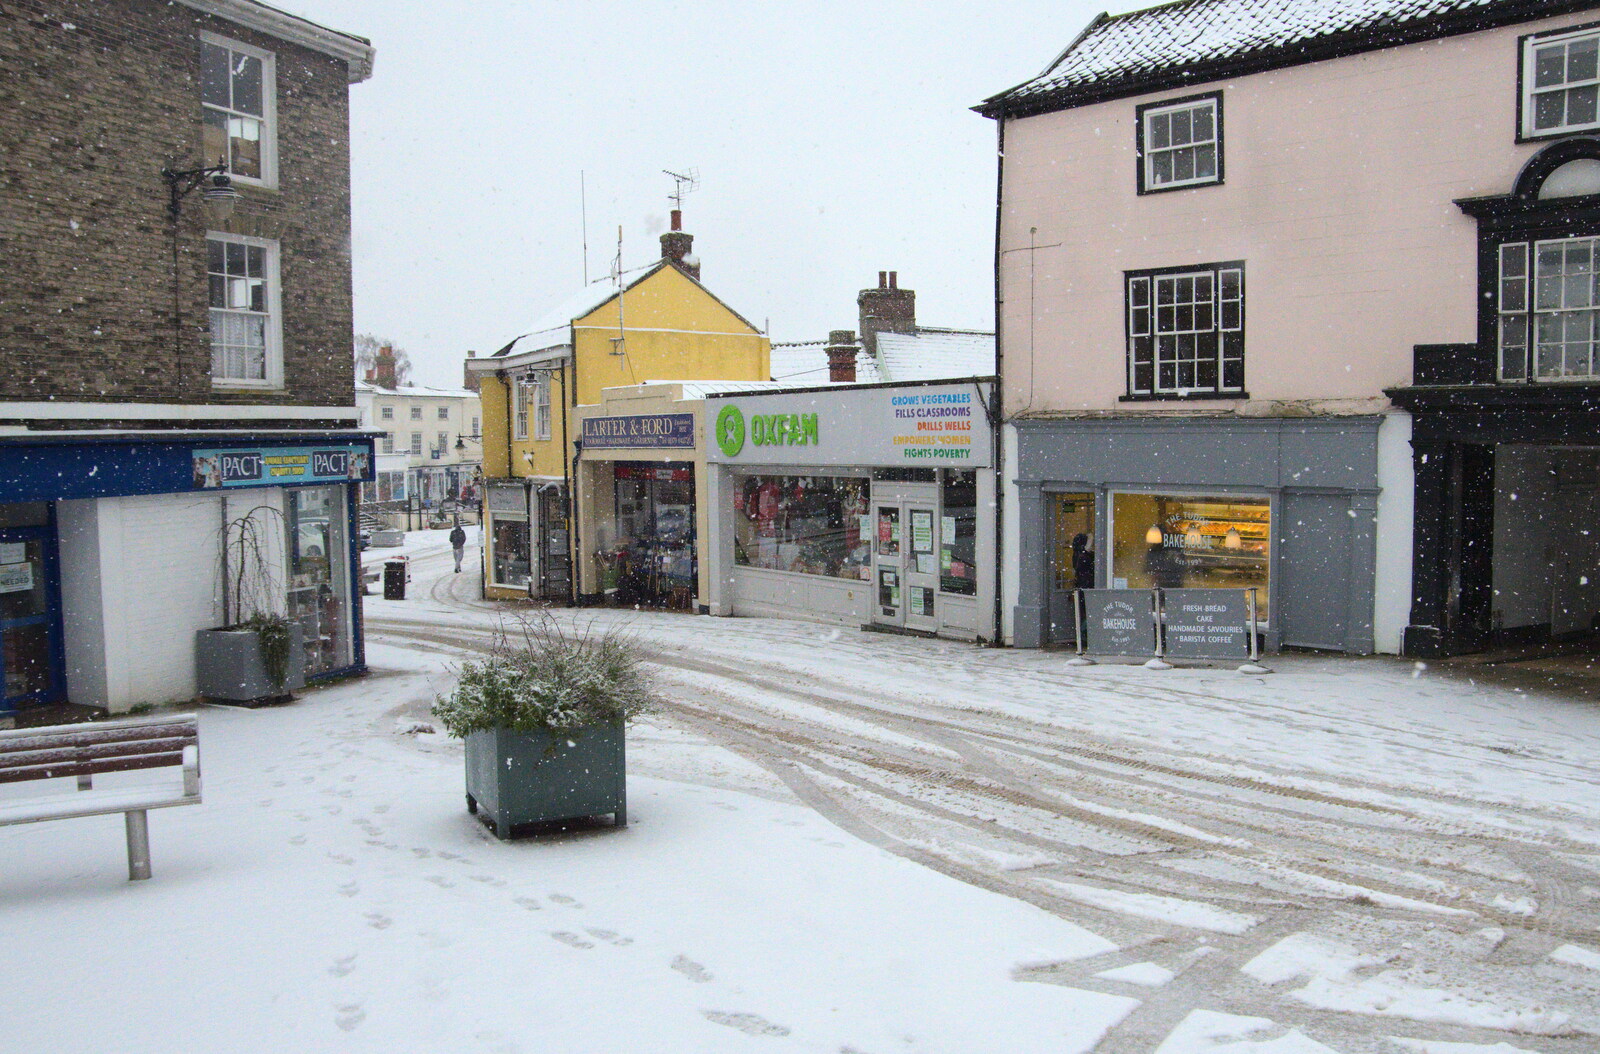 Larter and Ford, and Oxfam from A Snowy Morning, Diss, Norfolk - 16th January 2021